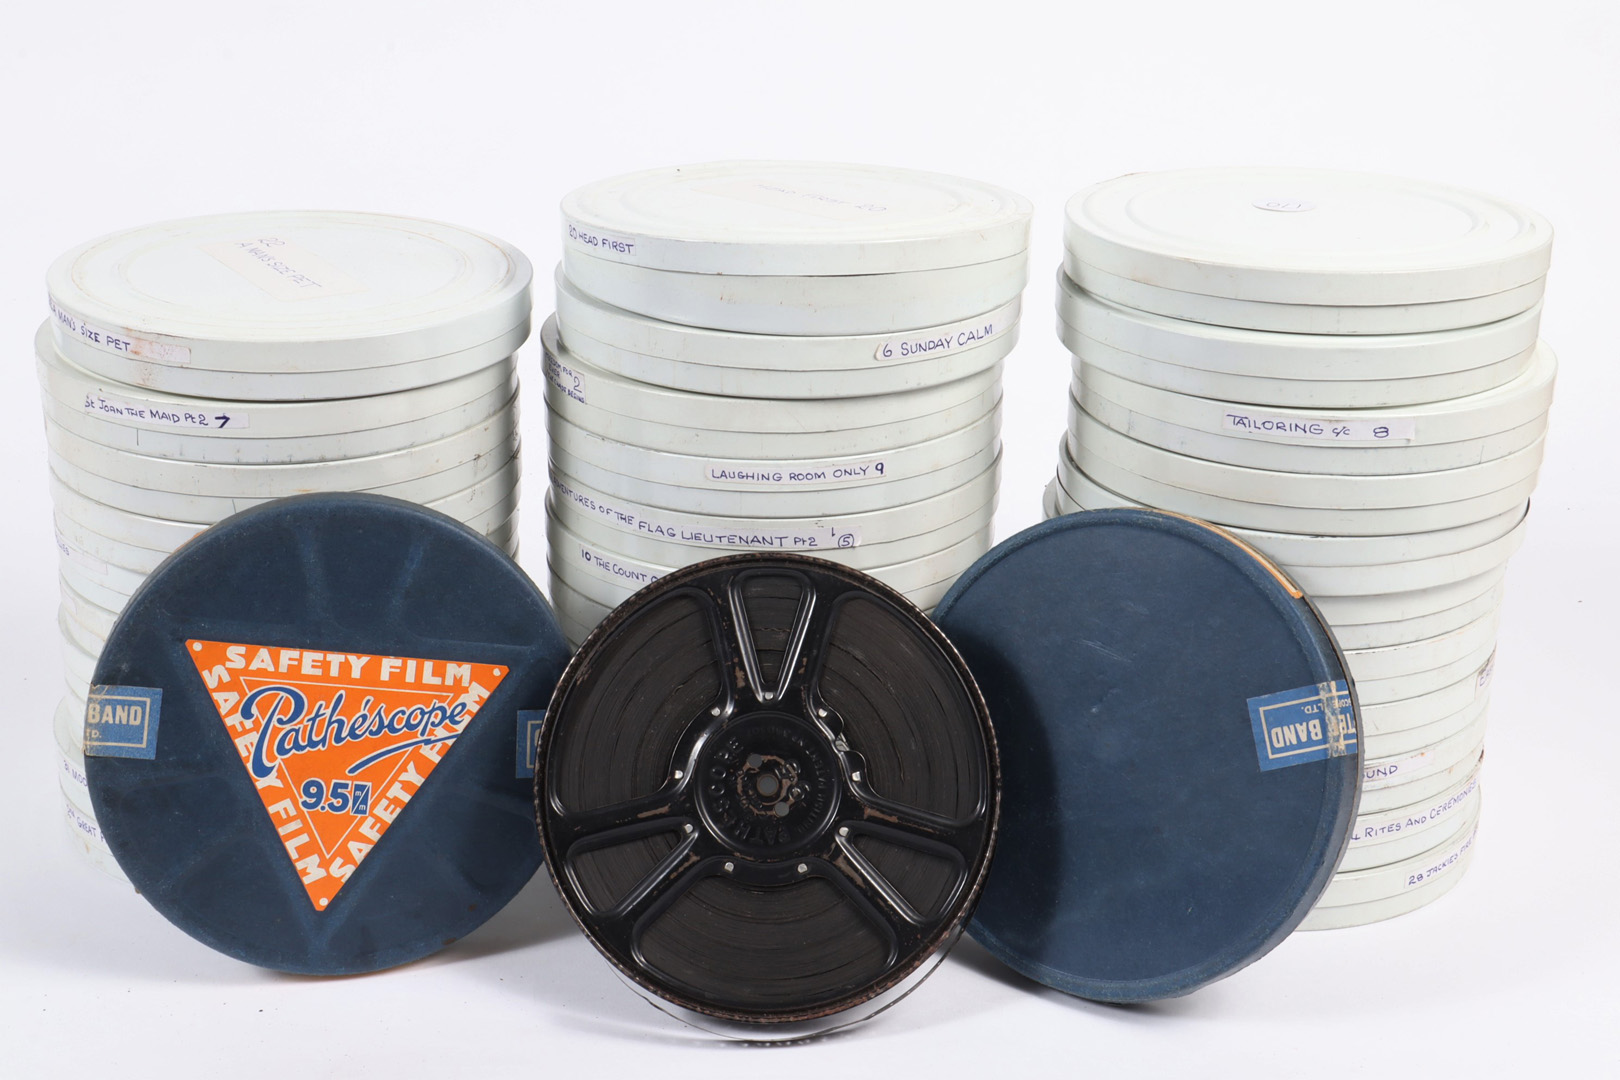 A Quantity of 9.5 Cine Films, in canisters marked with titles, Full Steam Ahead, Walters Day Out,